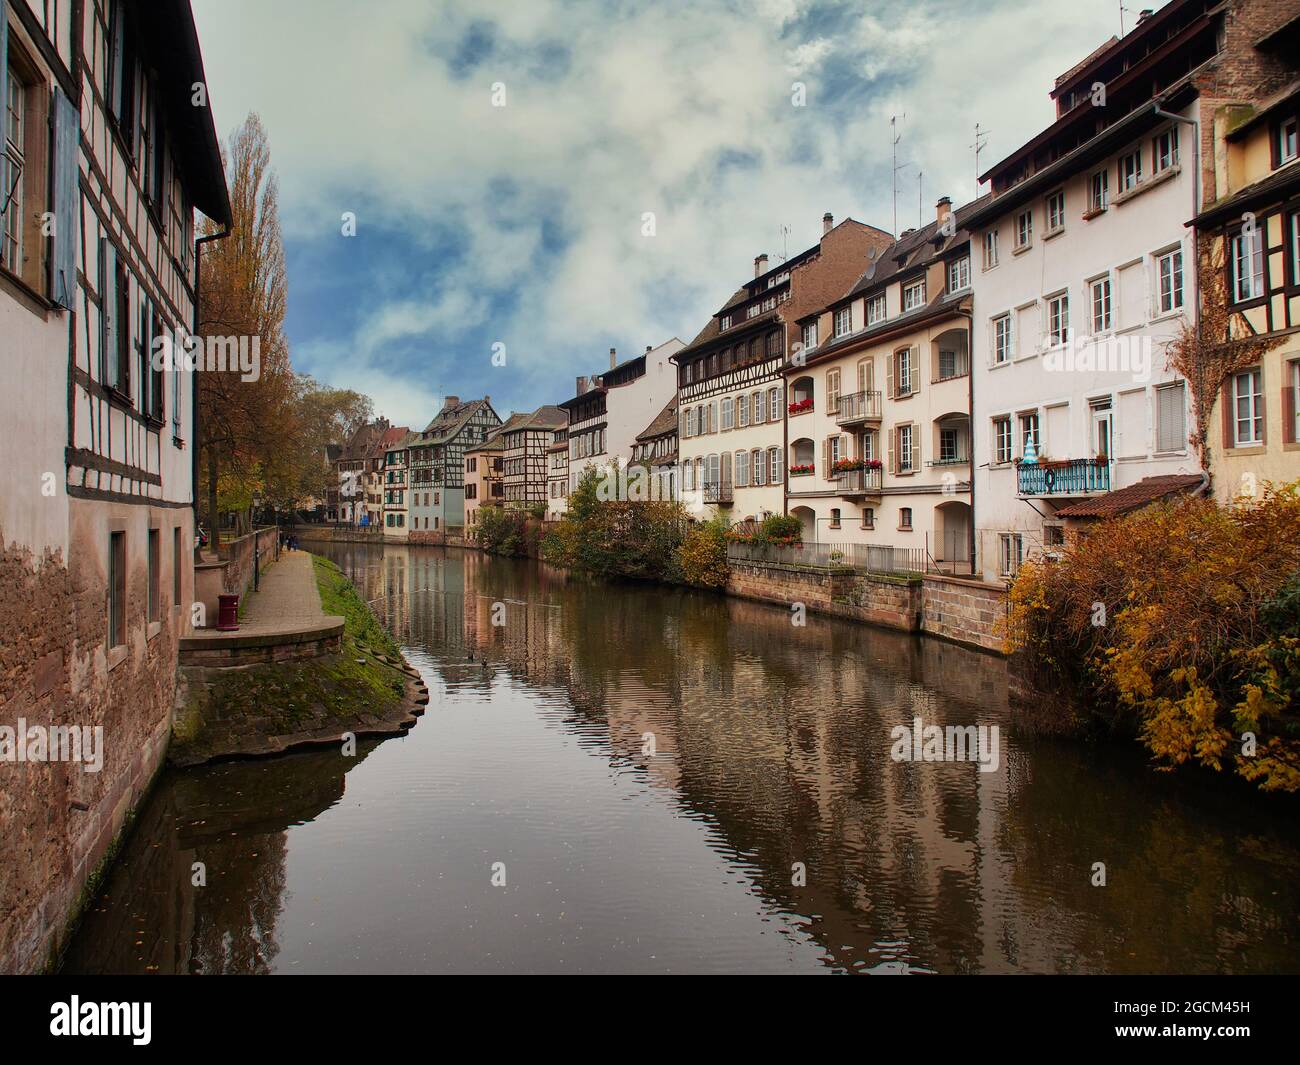 Strasbourg Canal lined with buildings Stock Photo